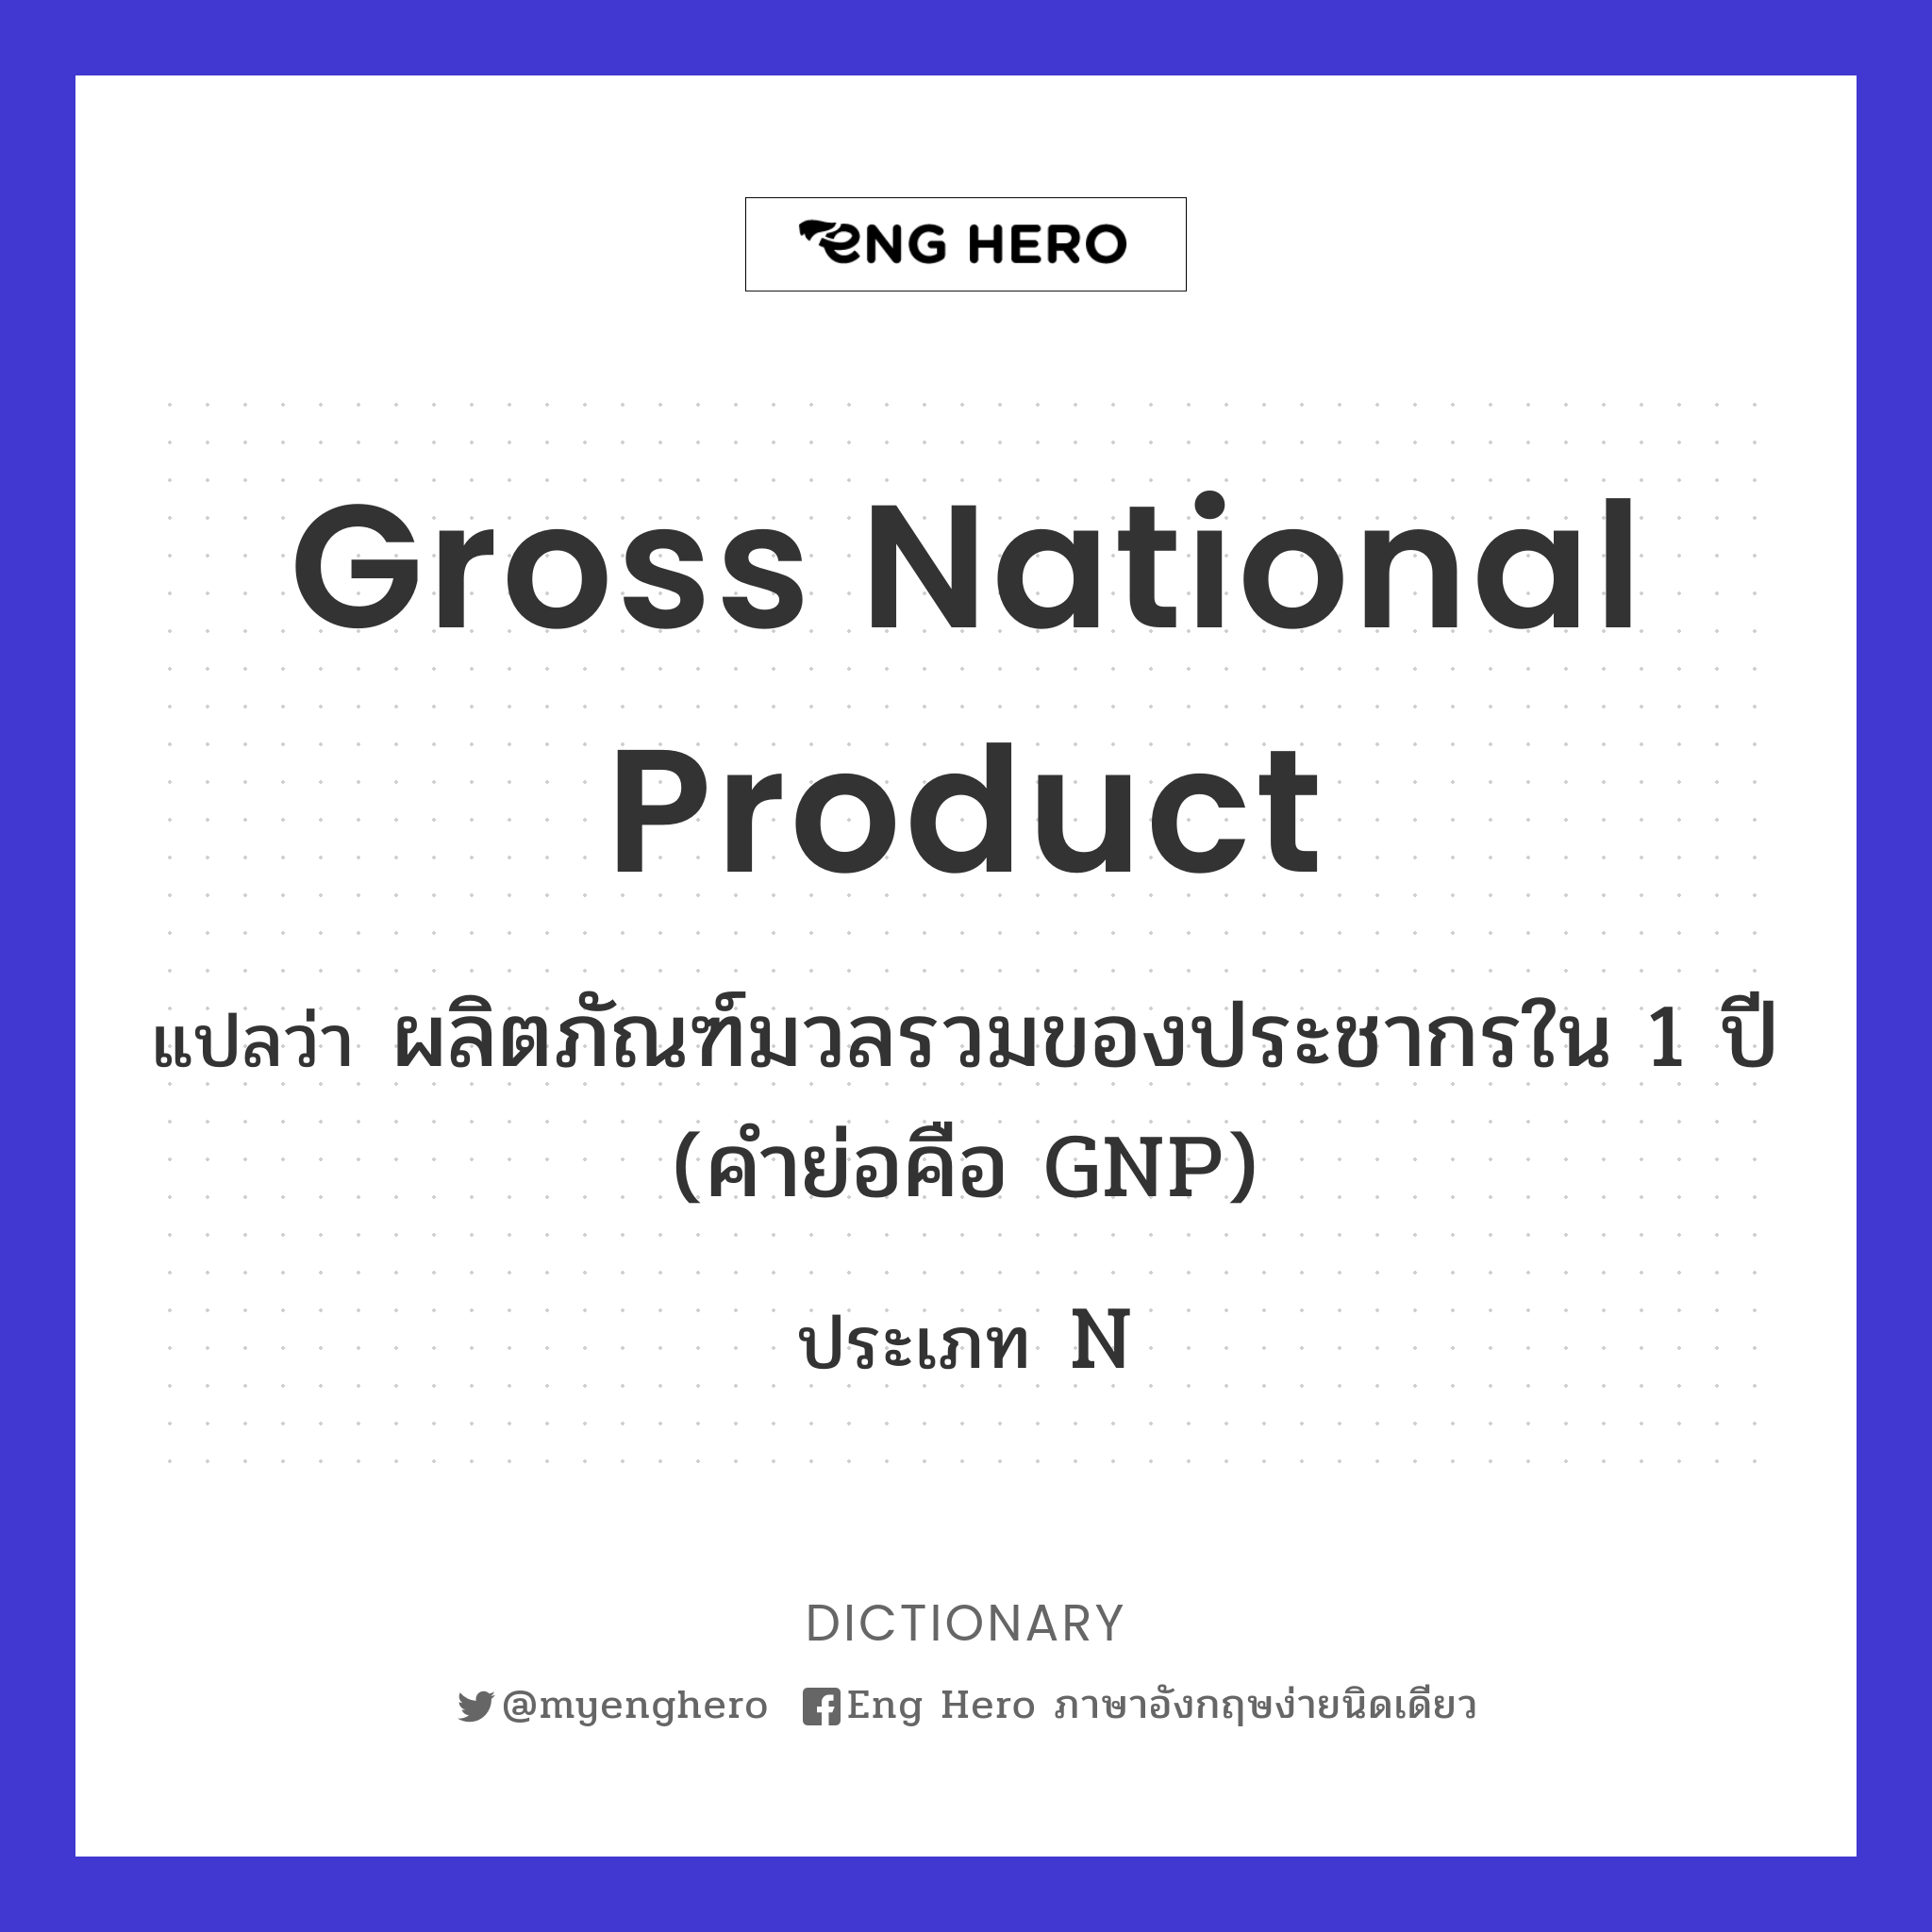 Gross National Product